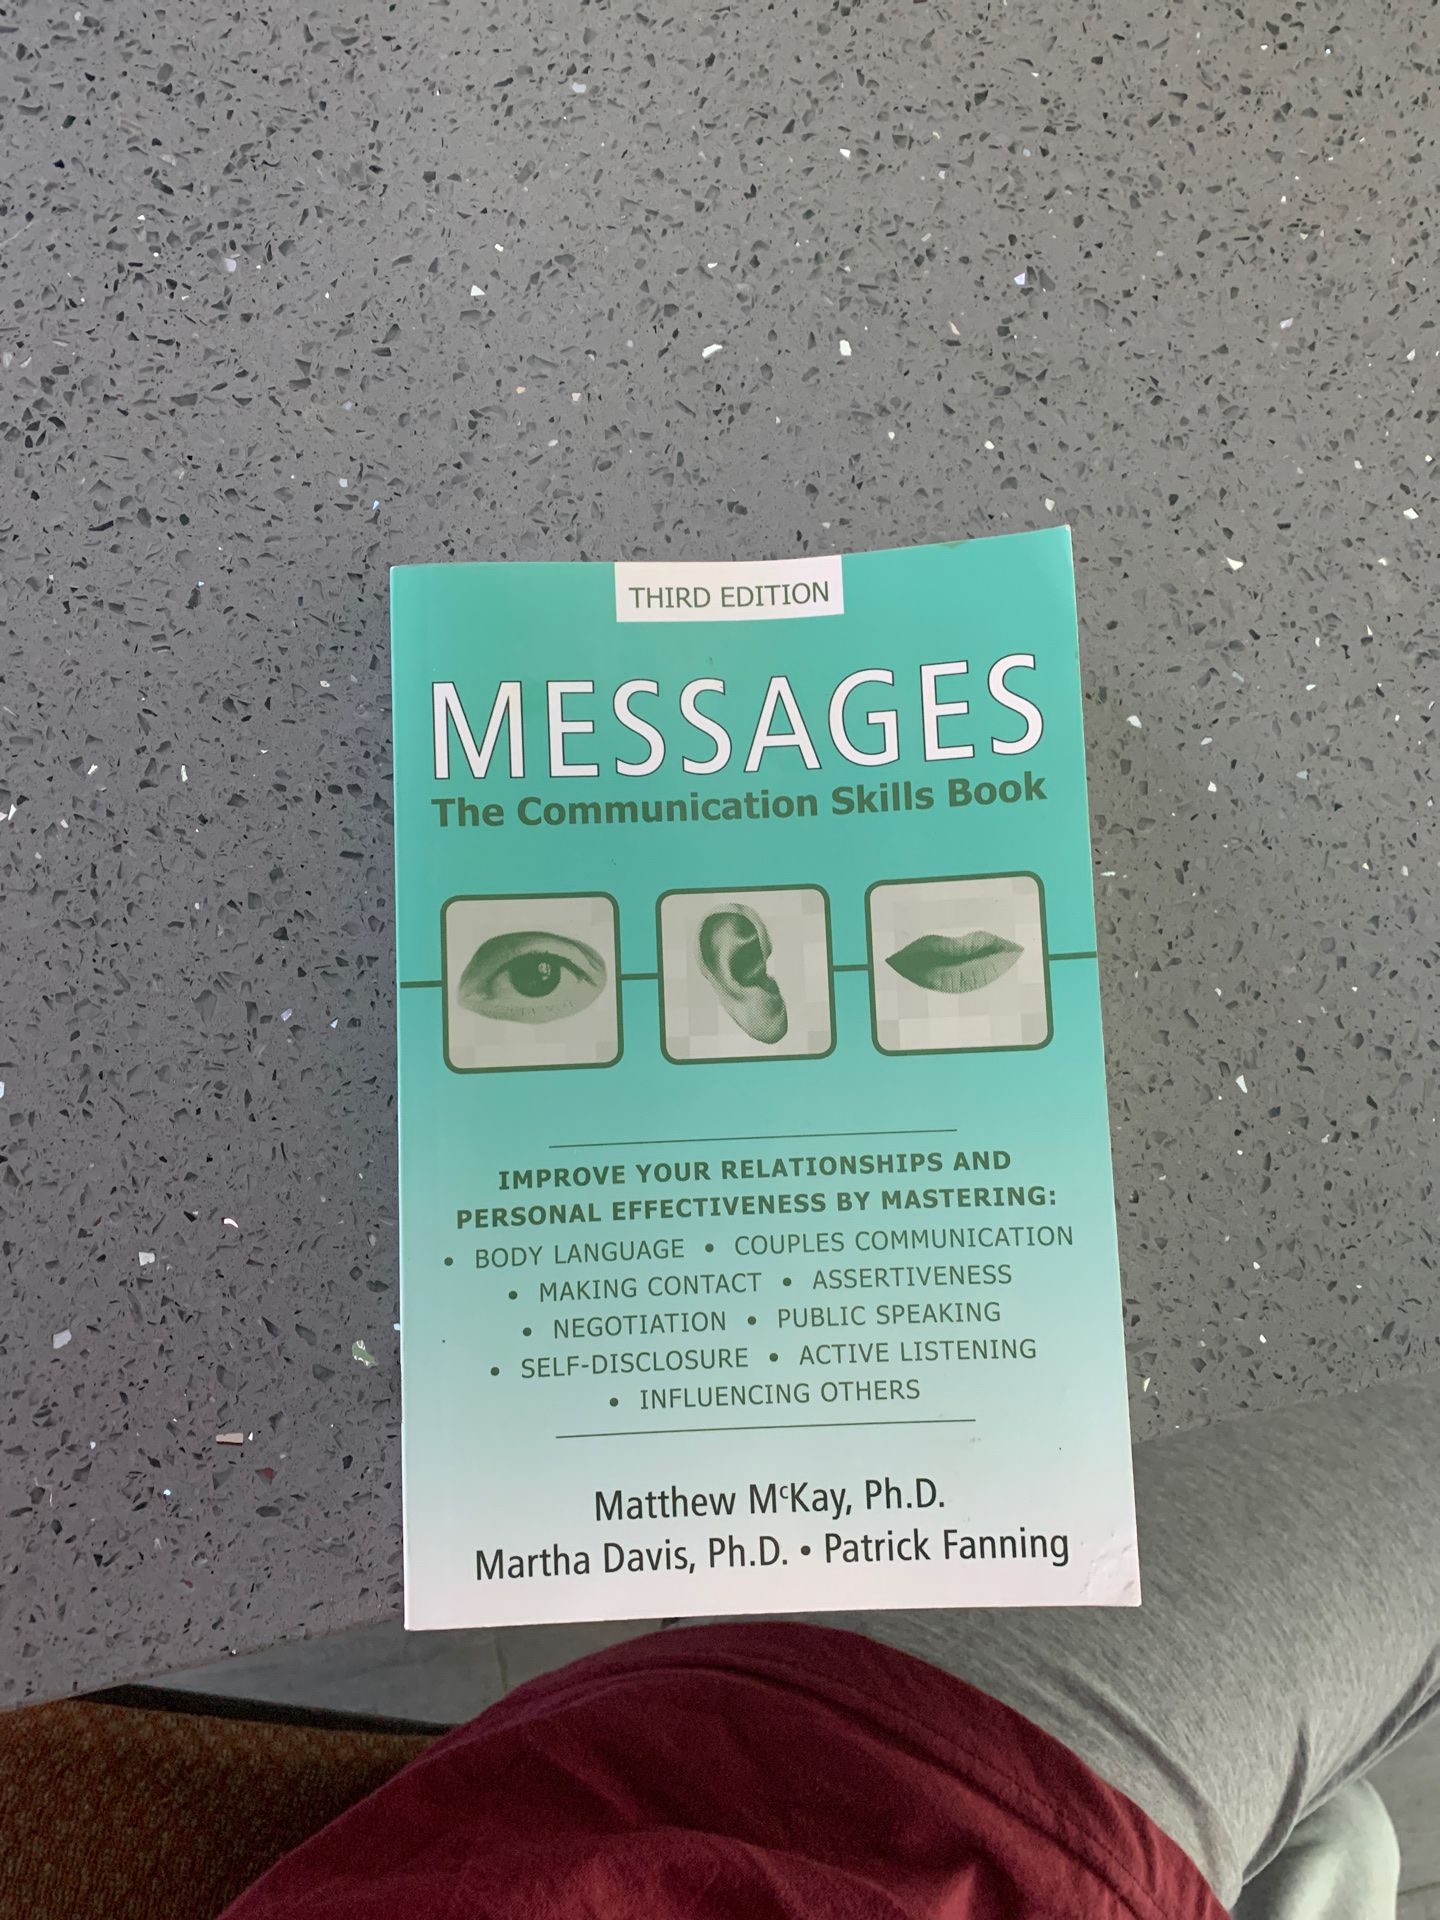 Messages the communication skills book